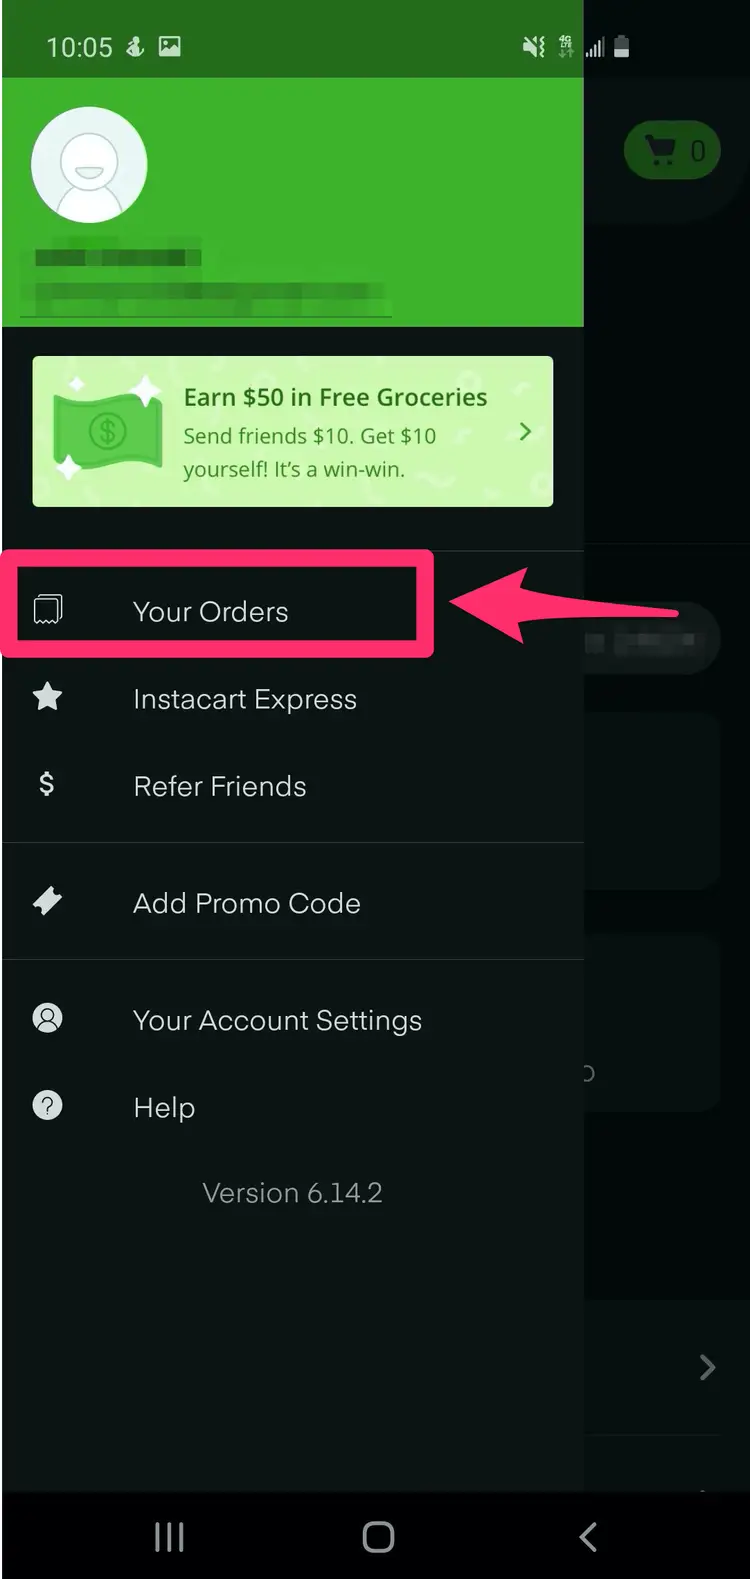 Can Instacart Customers Cancel Orders?